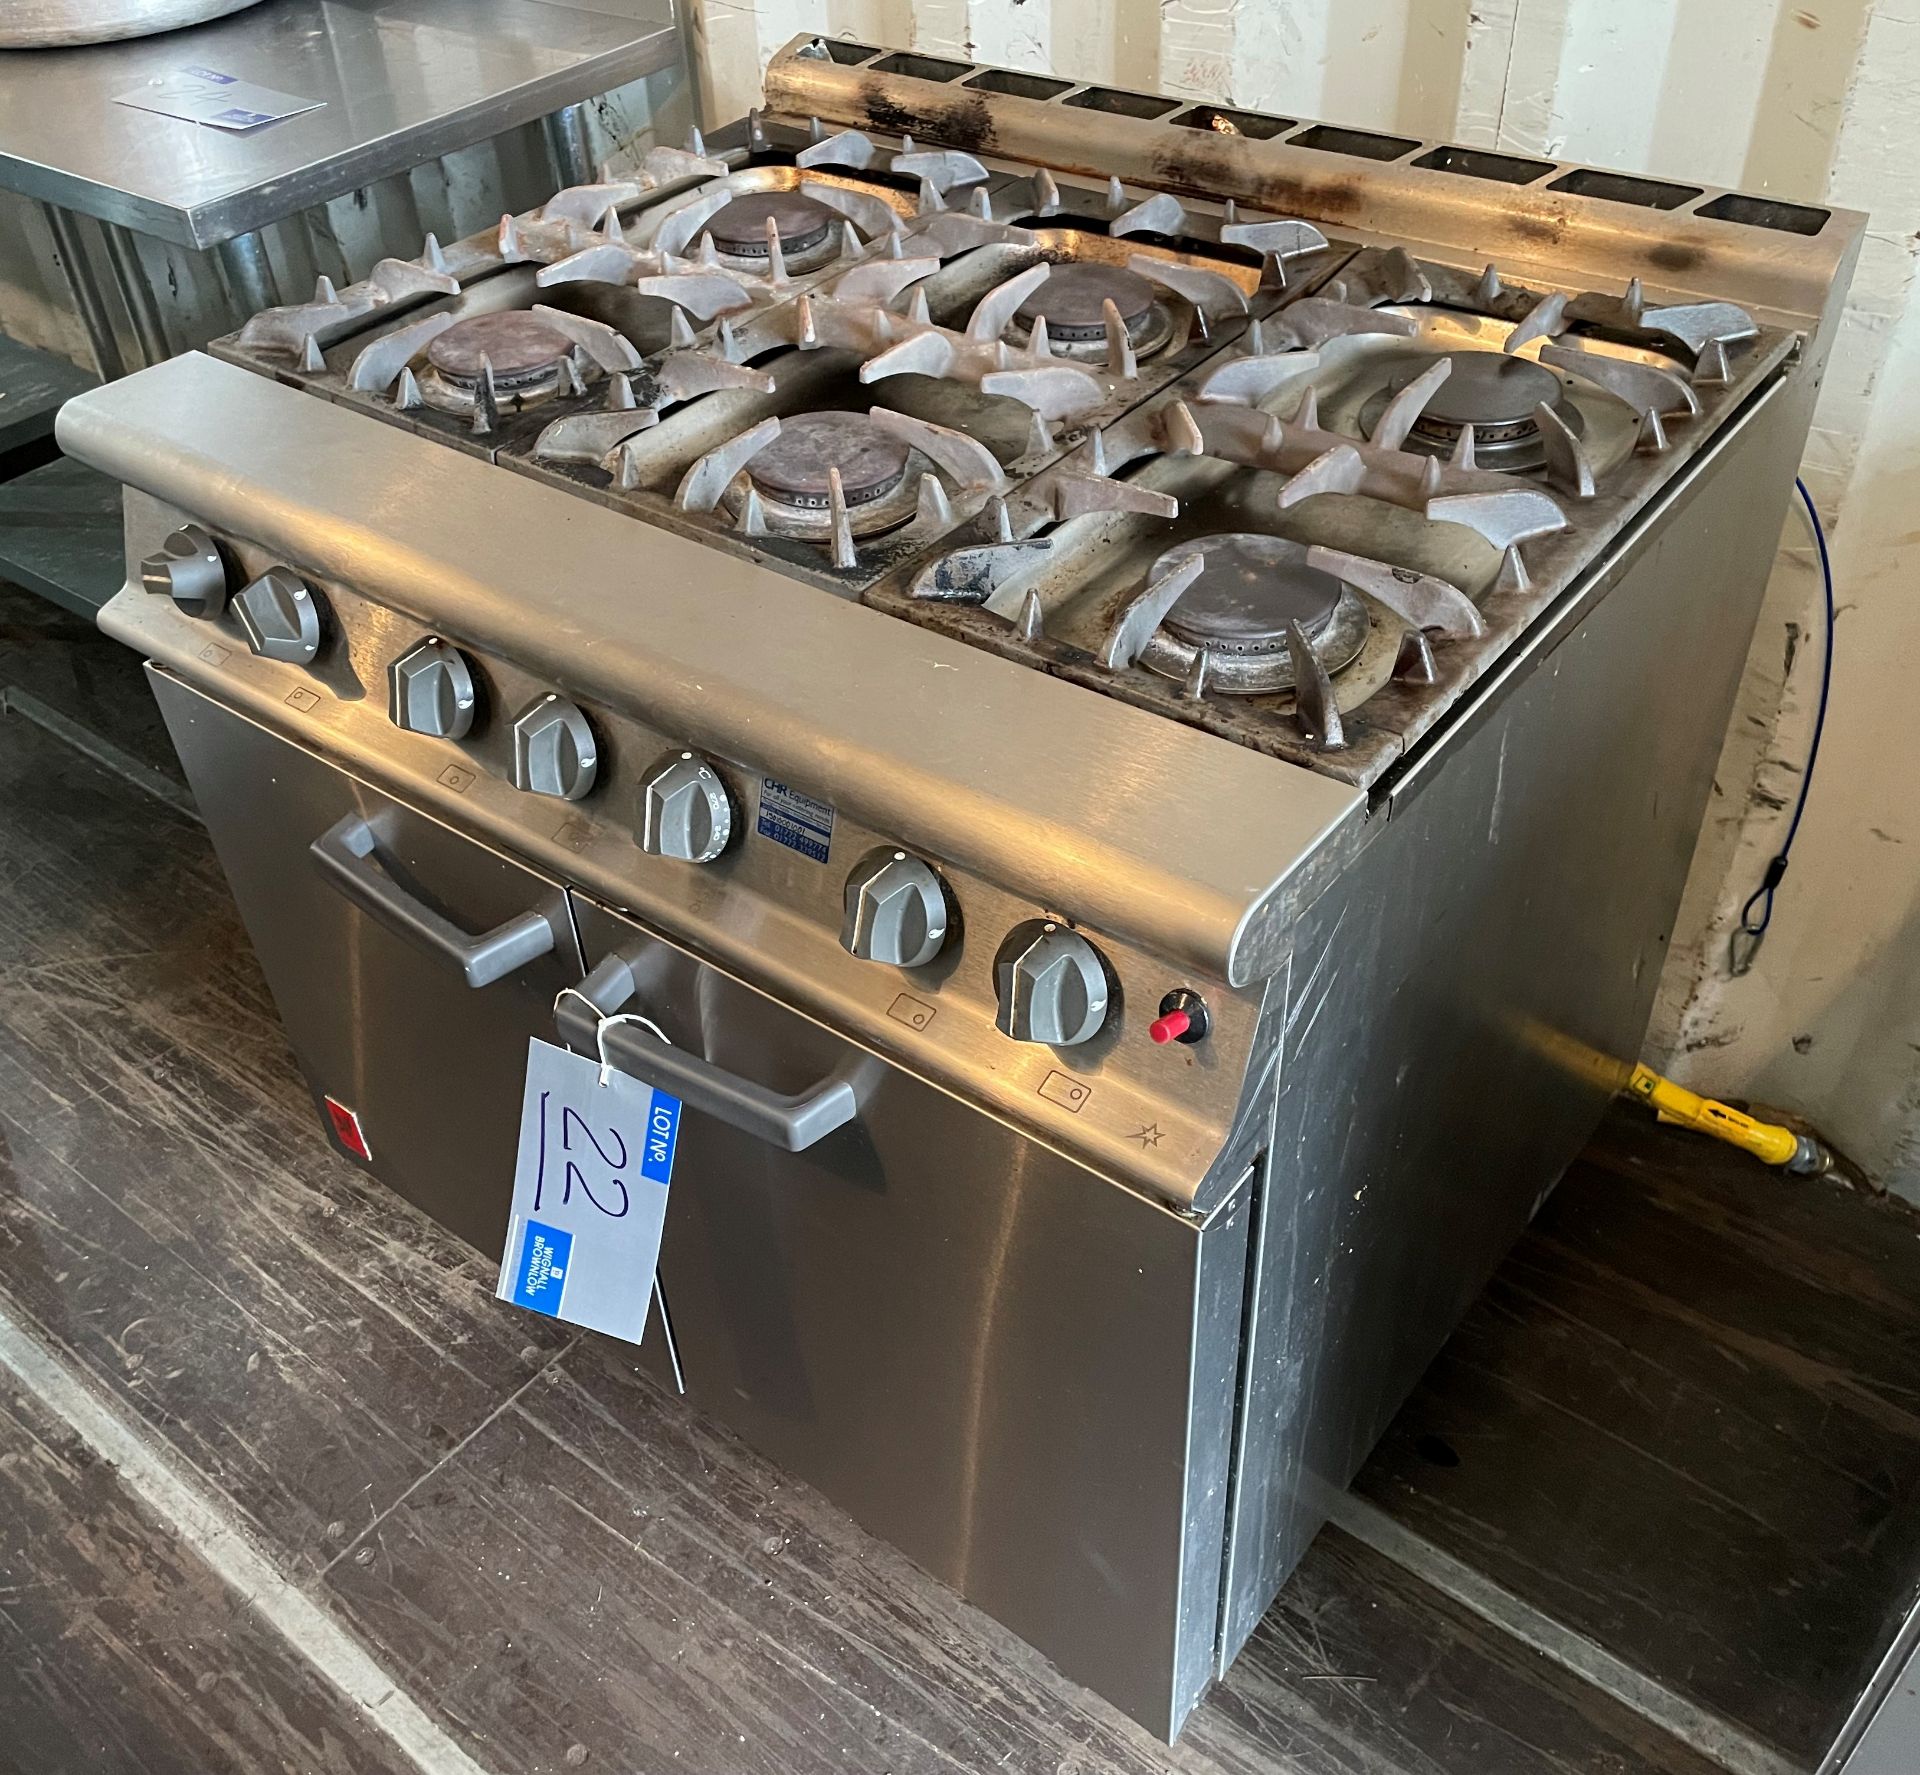 A Falcon G3101 6 ring Double Door Gas Range, one cast iron pan support cracked (located at EMS Asset